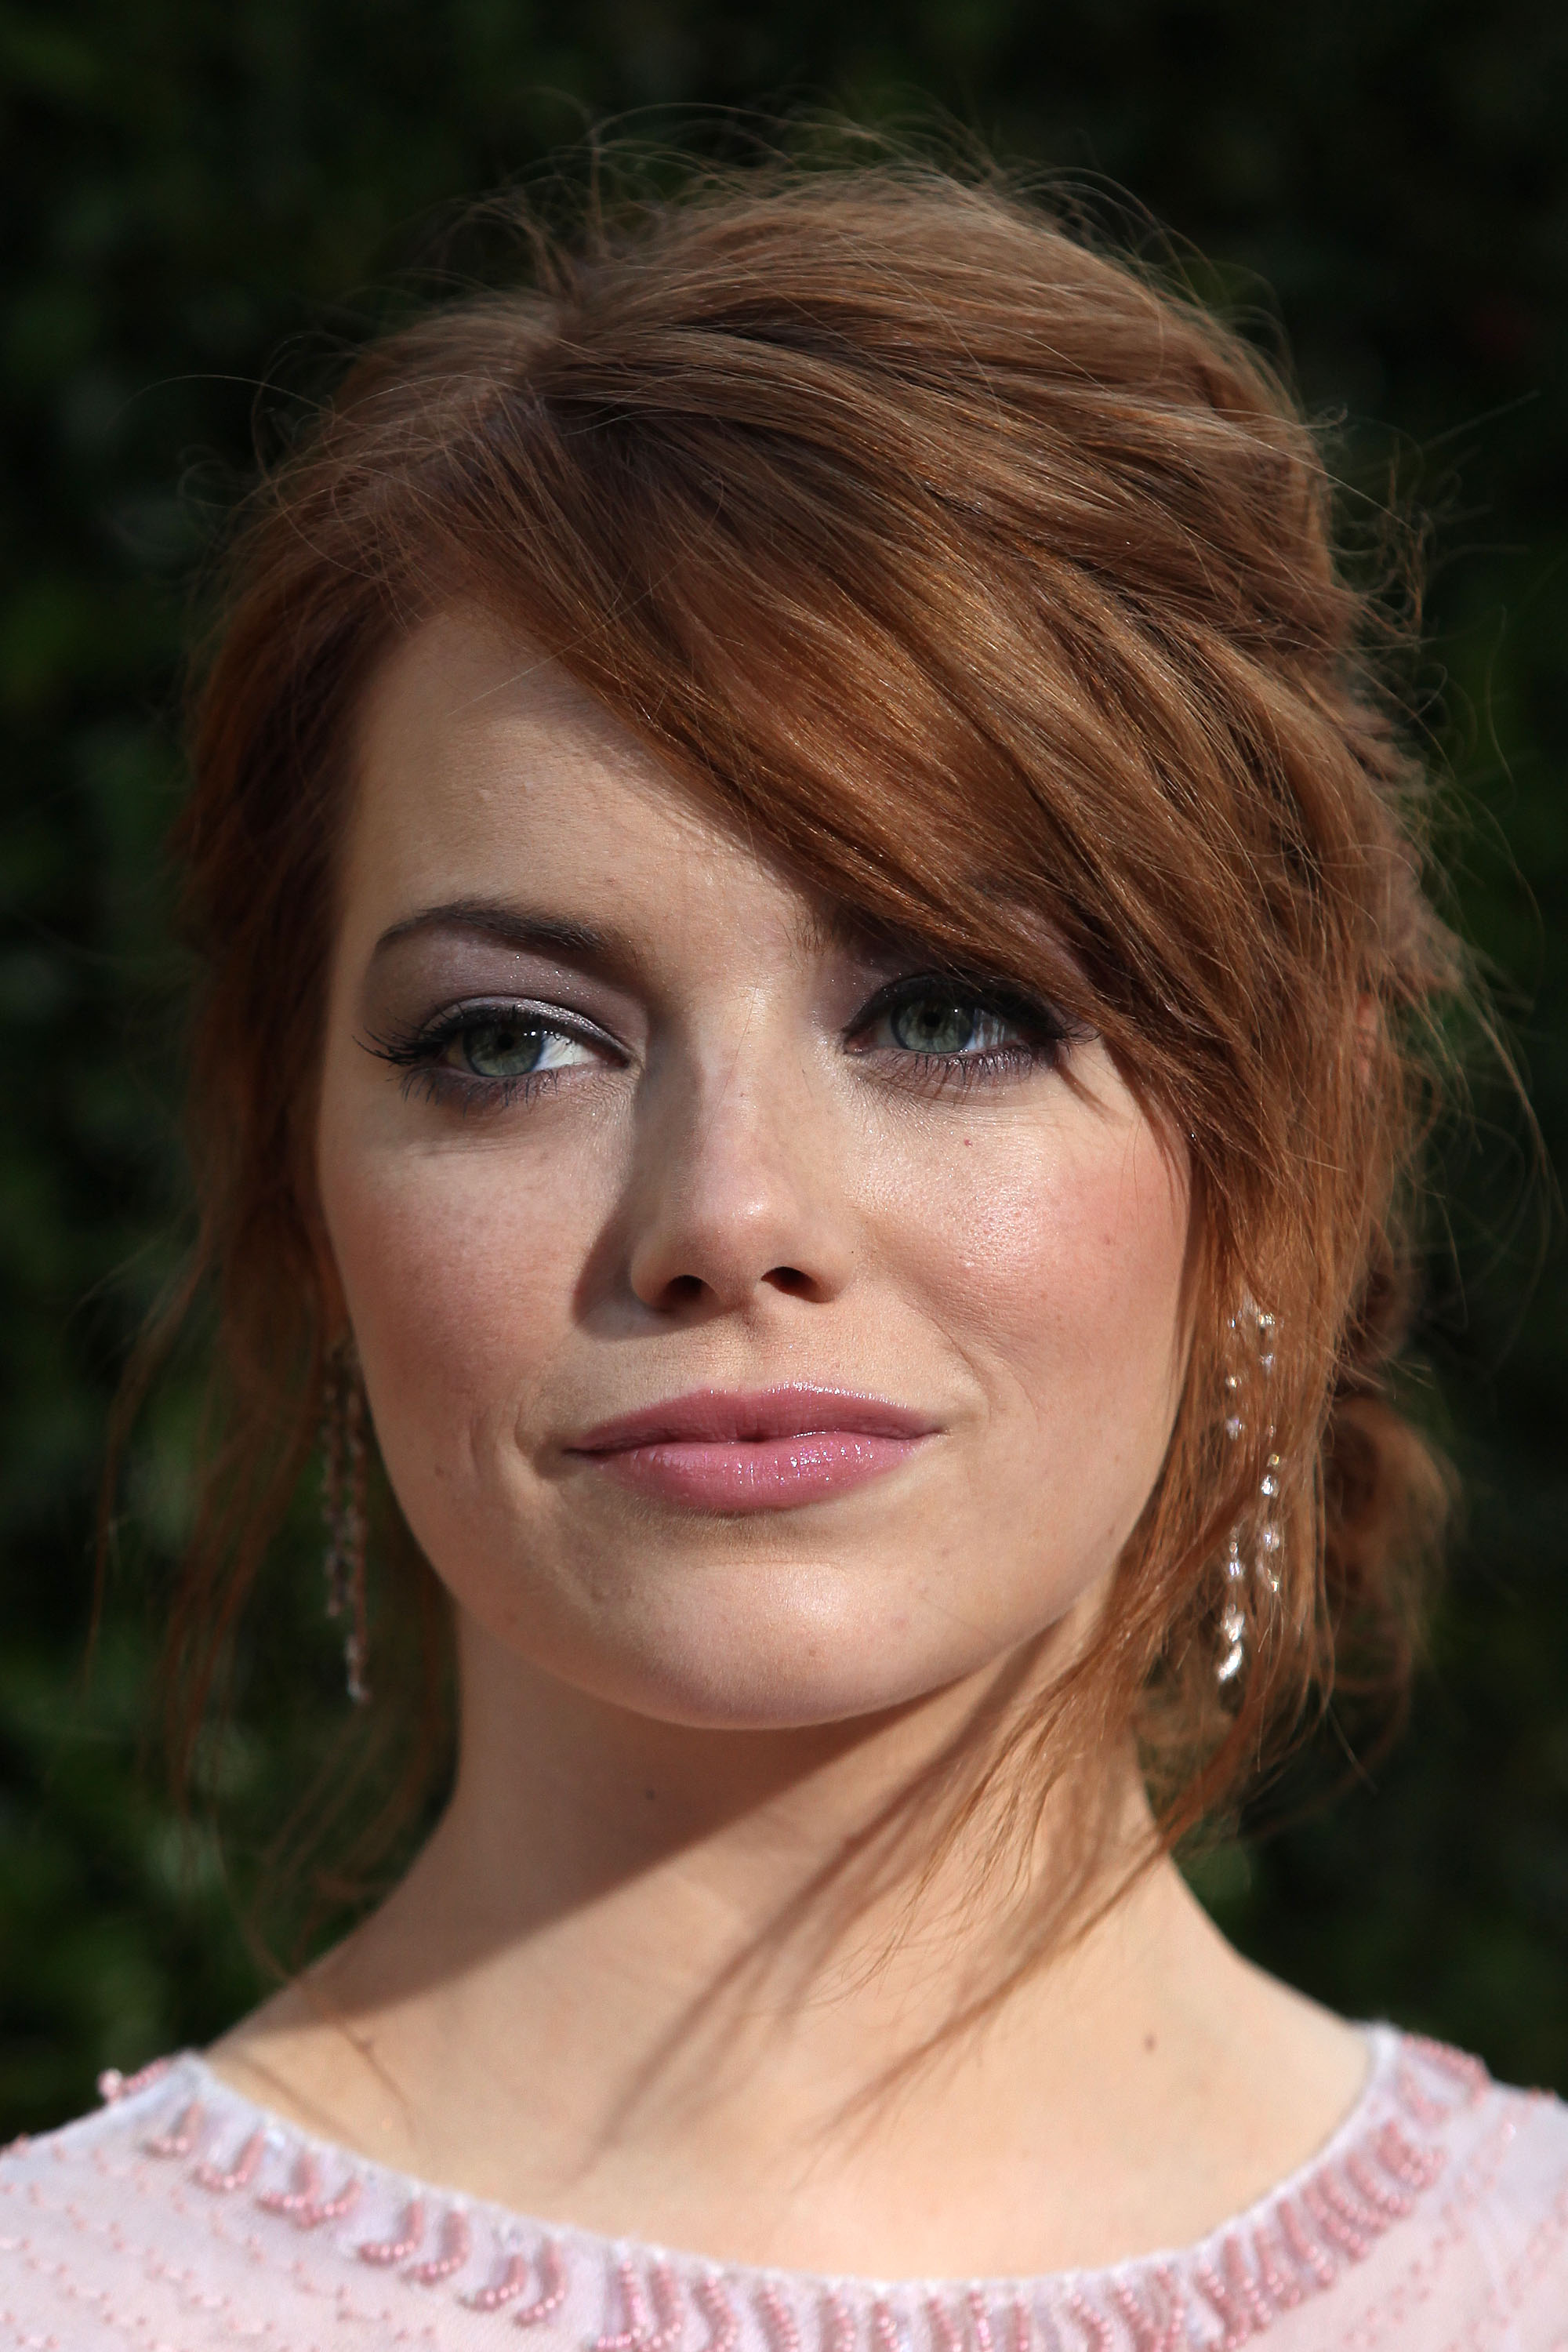 Emma Stone attends the LA Premiere of THE HELP in Samuel Goldwyn Theater, Beverly Hills on 9th August 2011